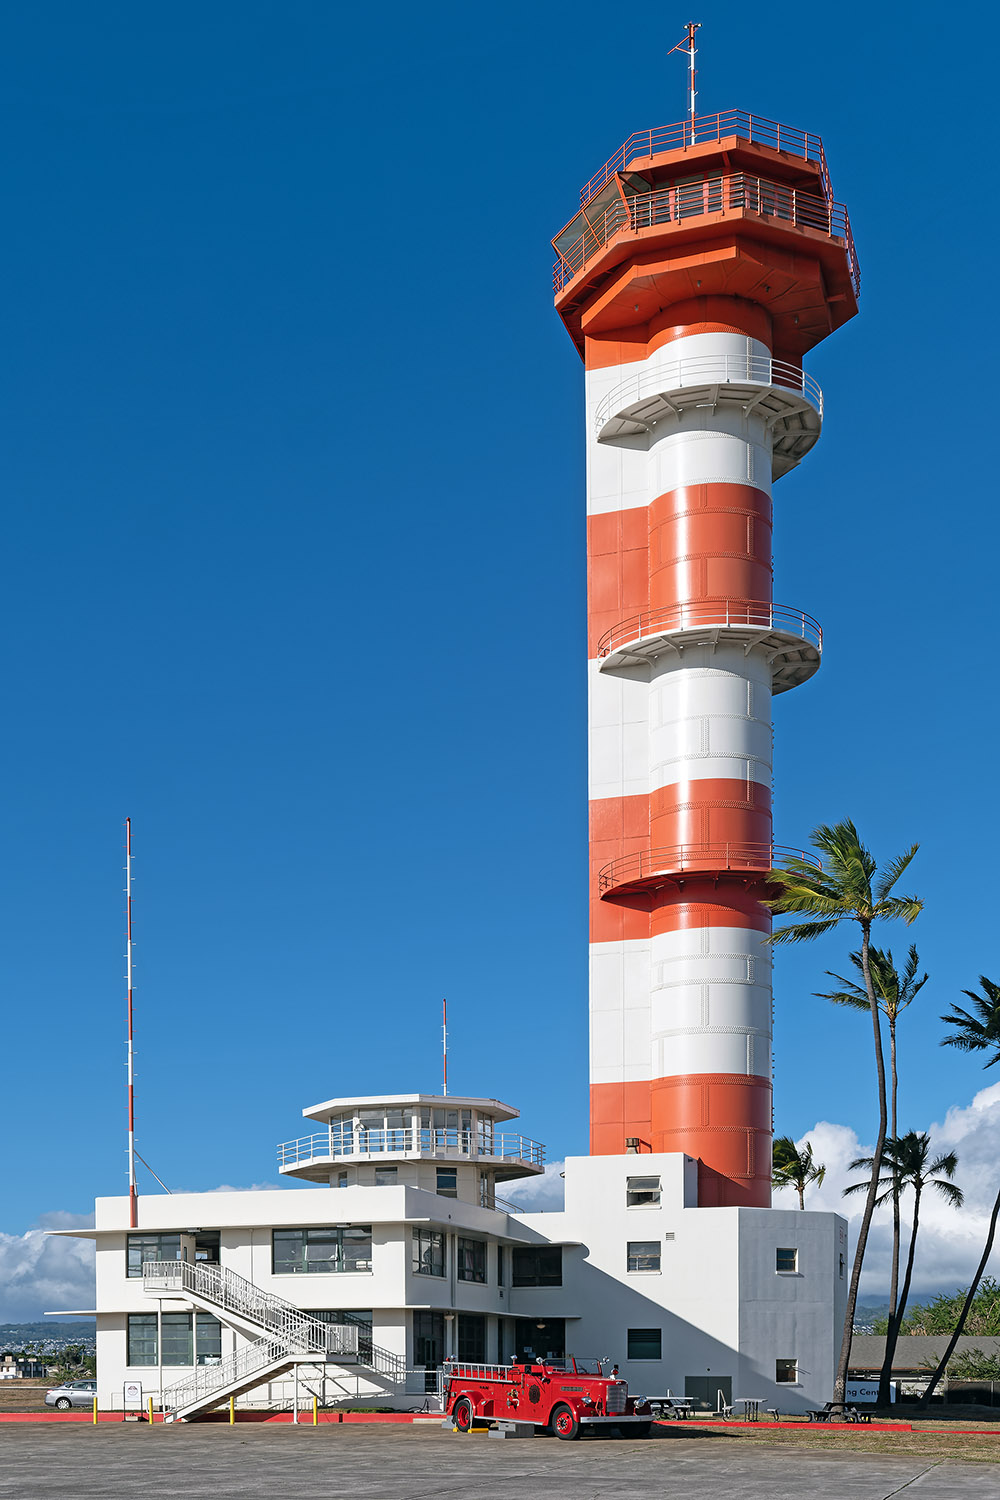 The iconic control tower of Hickam Field, Ford Island, Pearl Harbor